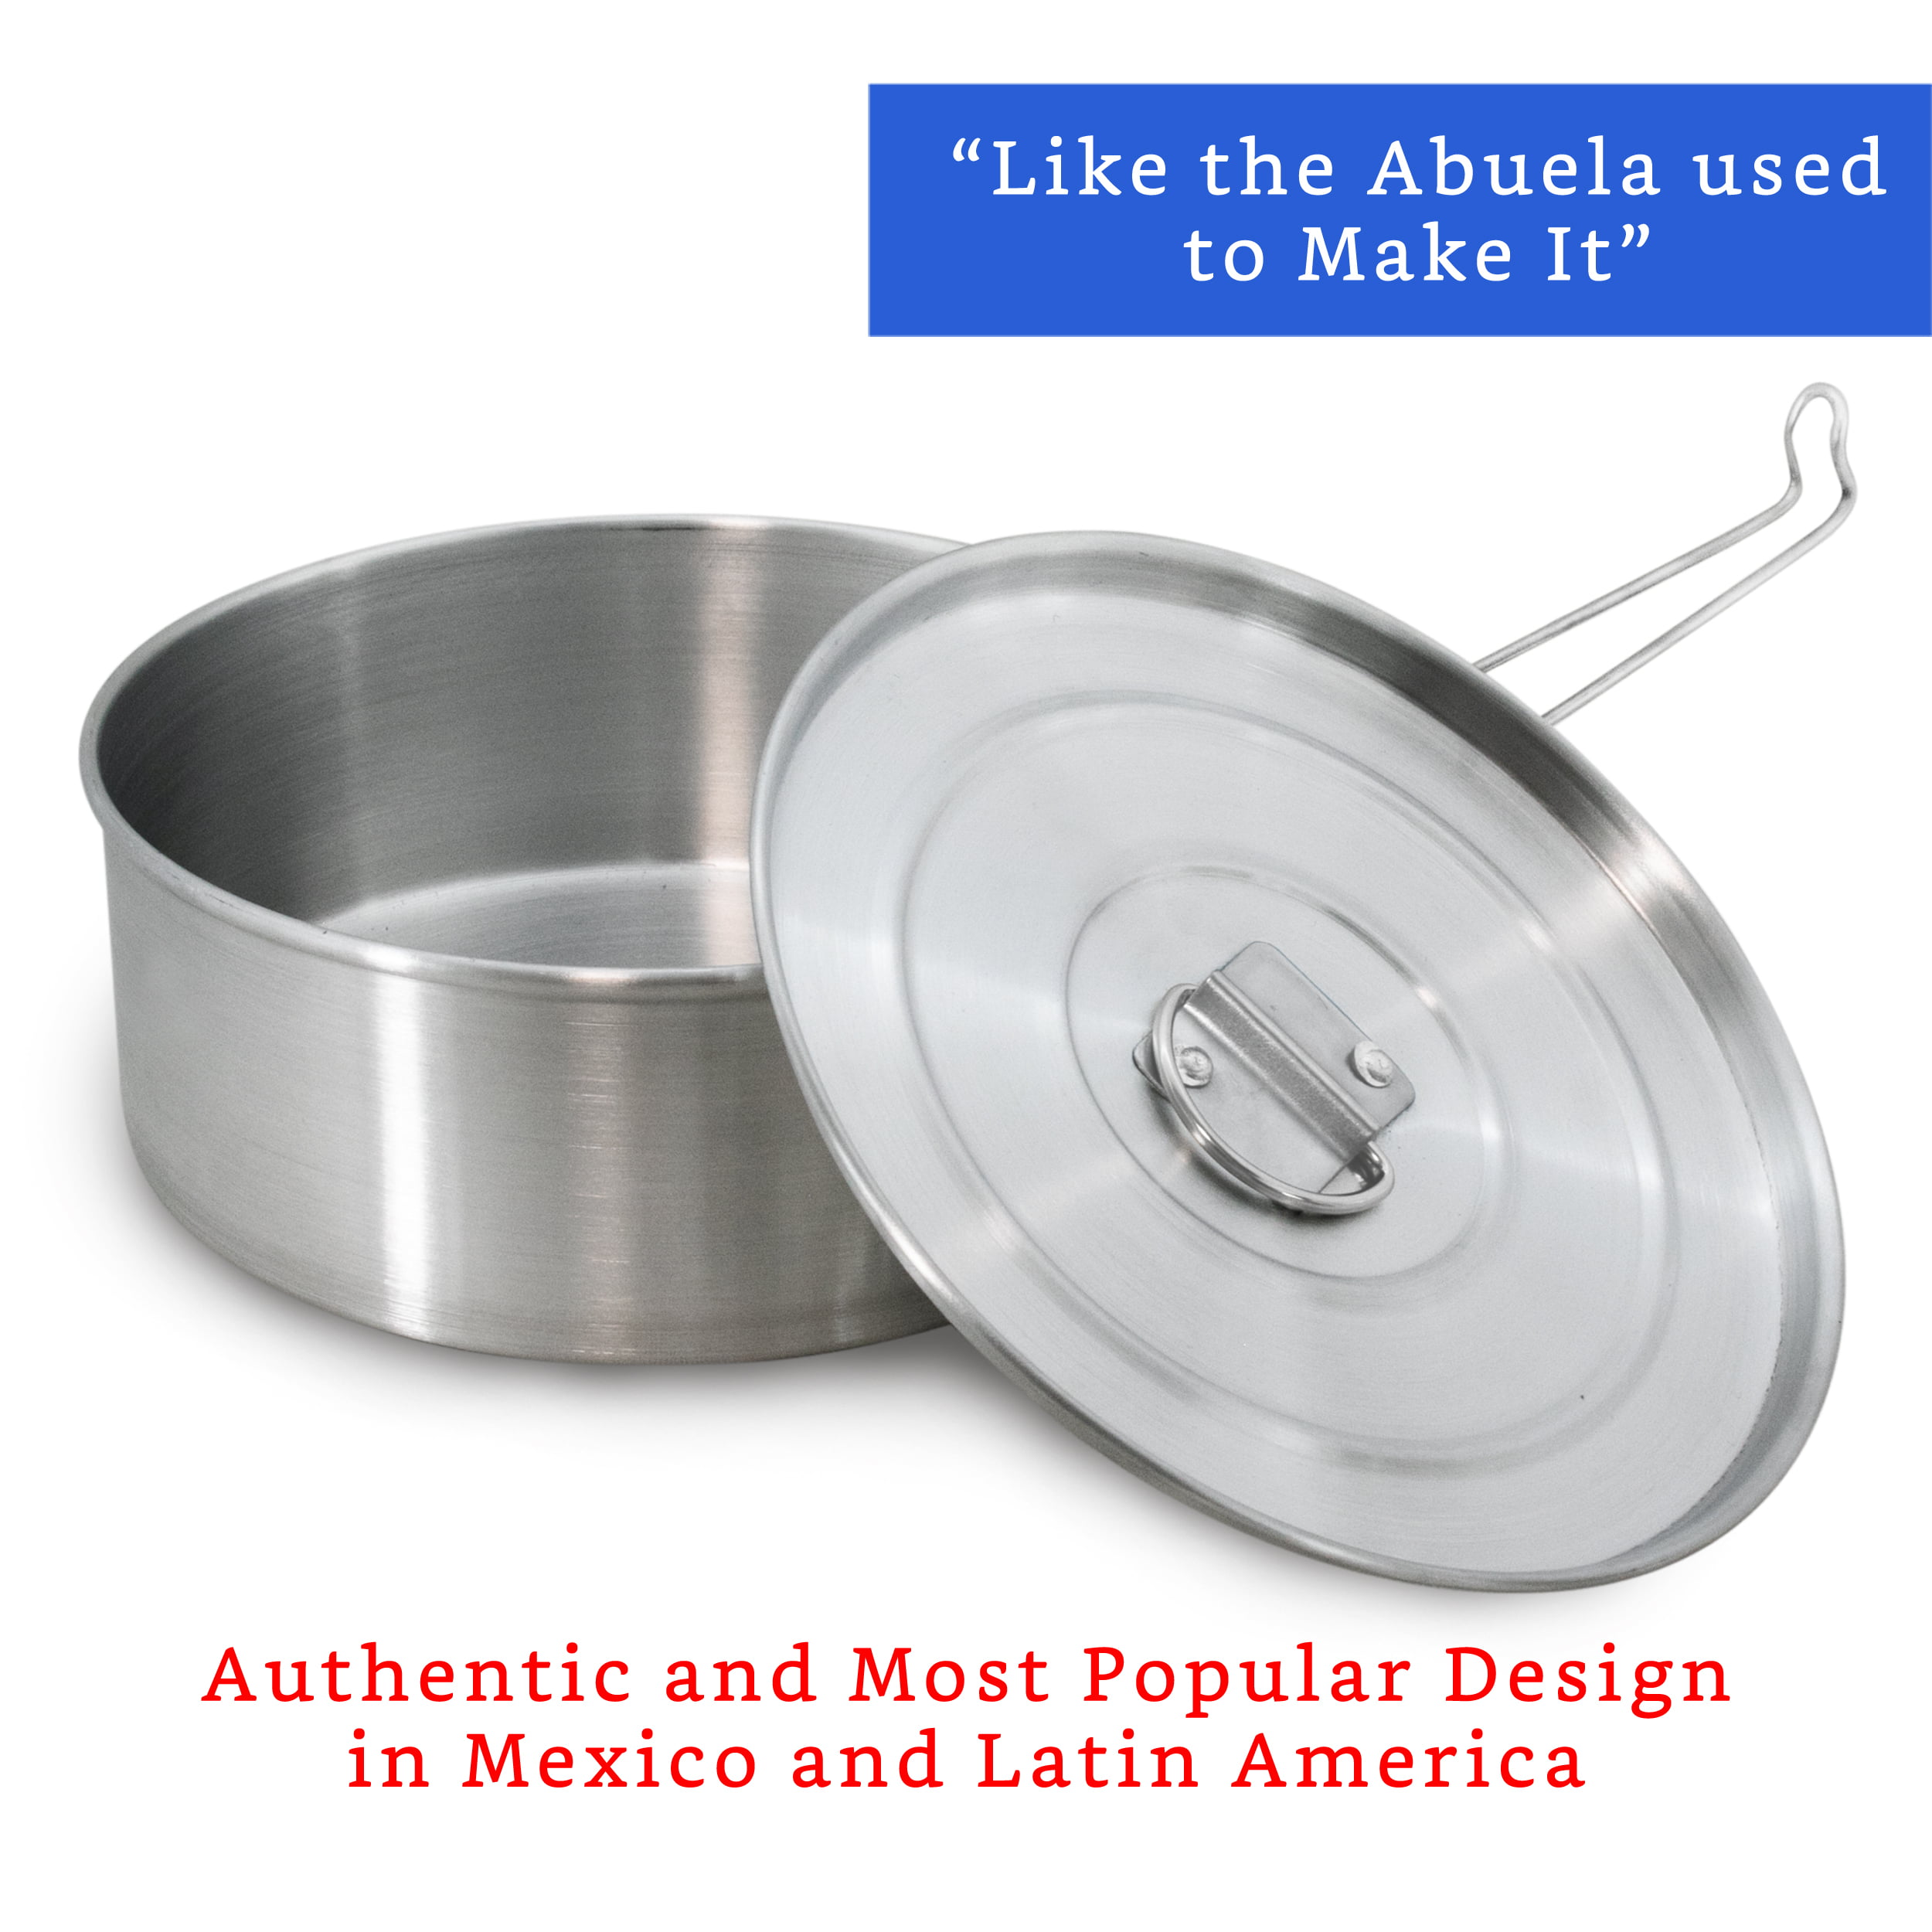 Flan Mold with Lid (8.2 x 3.2 in) - Authentic Mexican Design Flanera Flan  Maker by Globe Rocket 